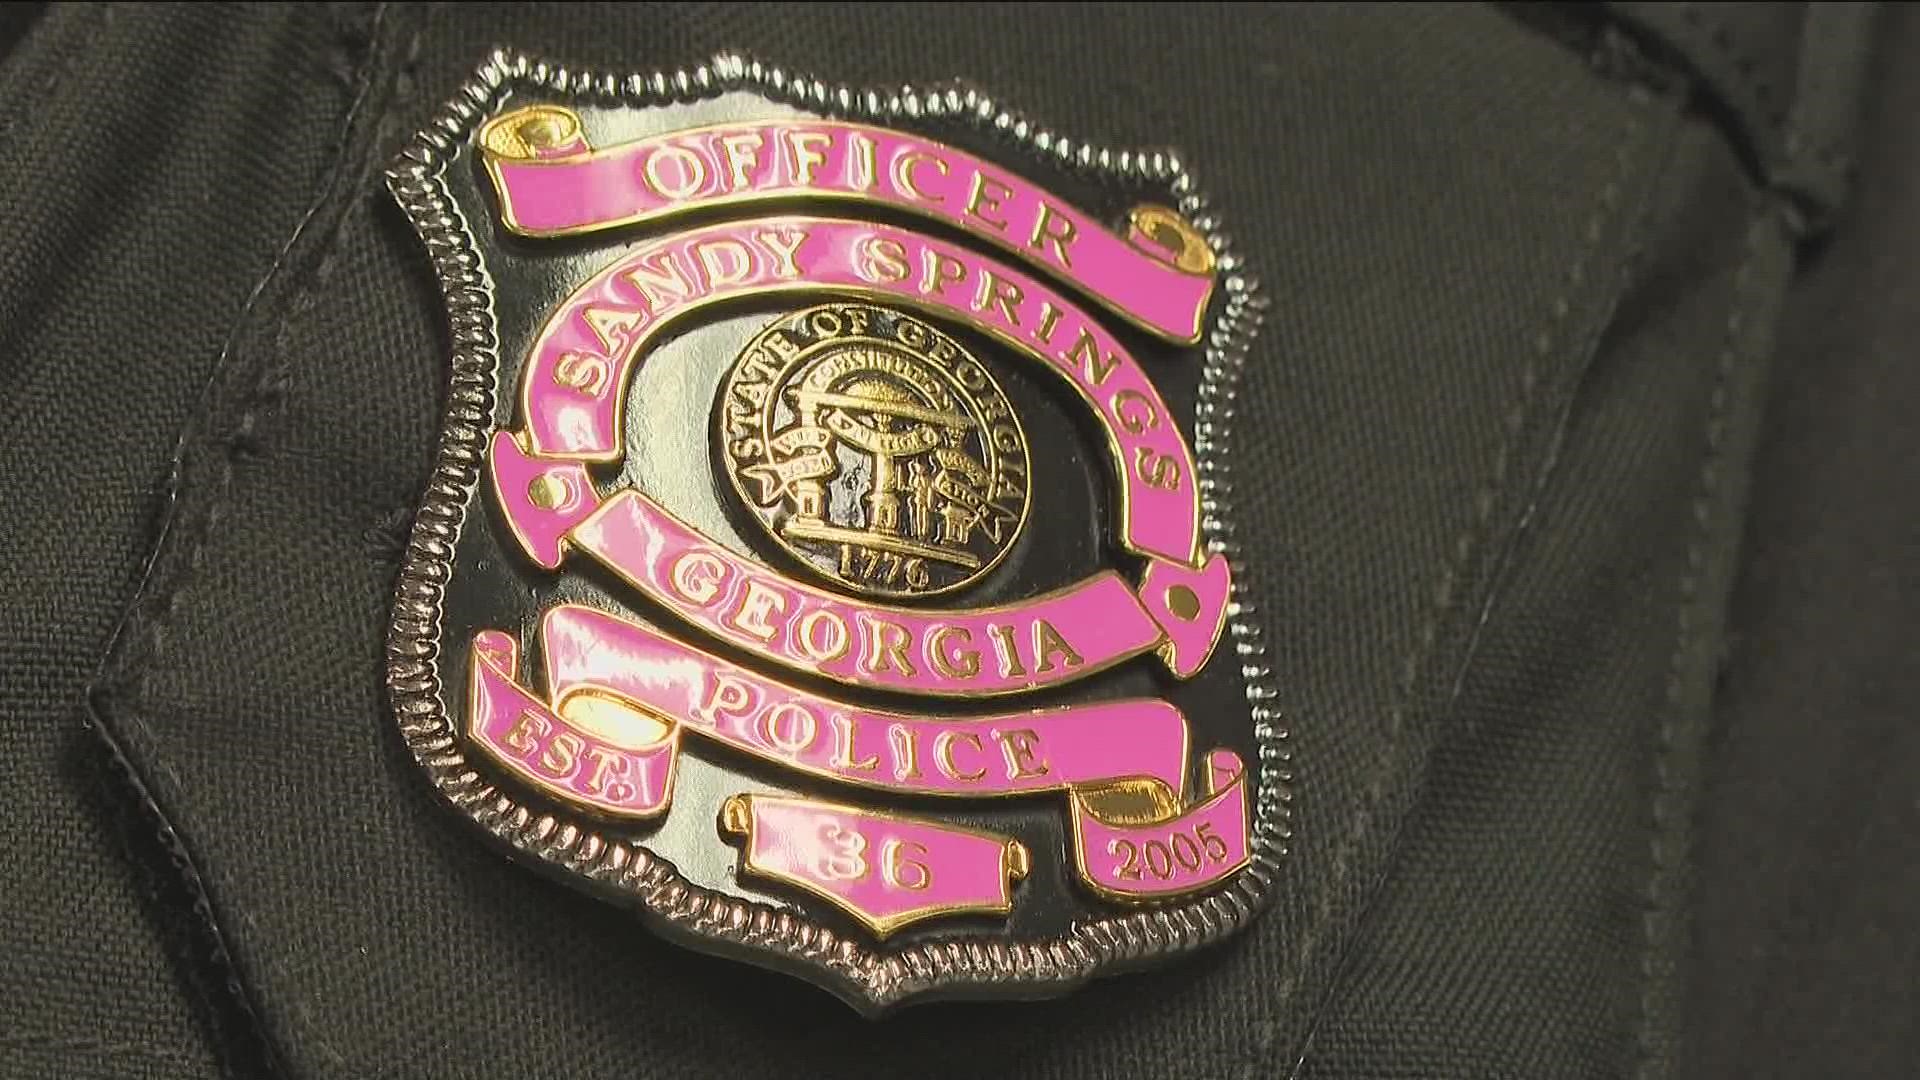 The Sandy Springs Police Department is showing its support for breast cancer survivors and loved ones lost to the disease.